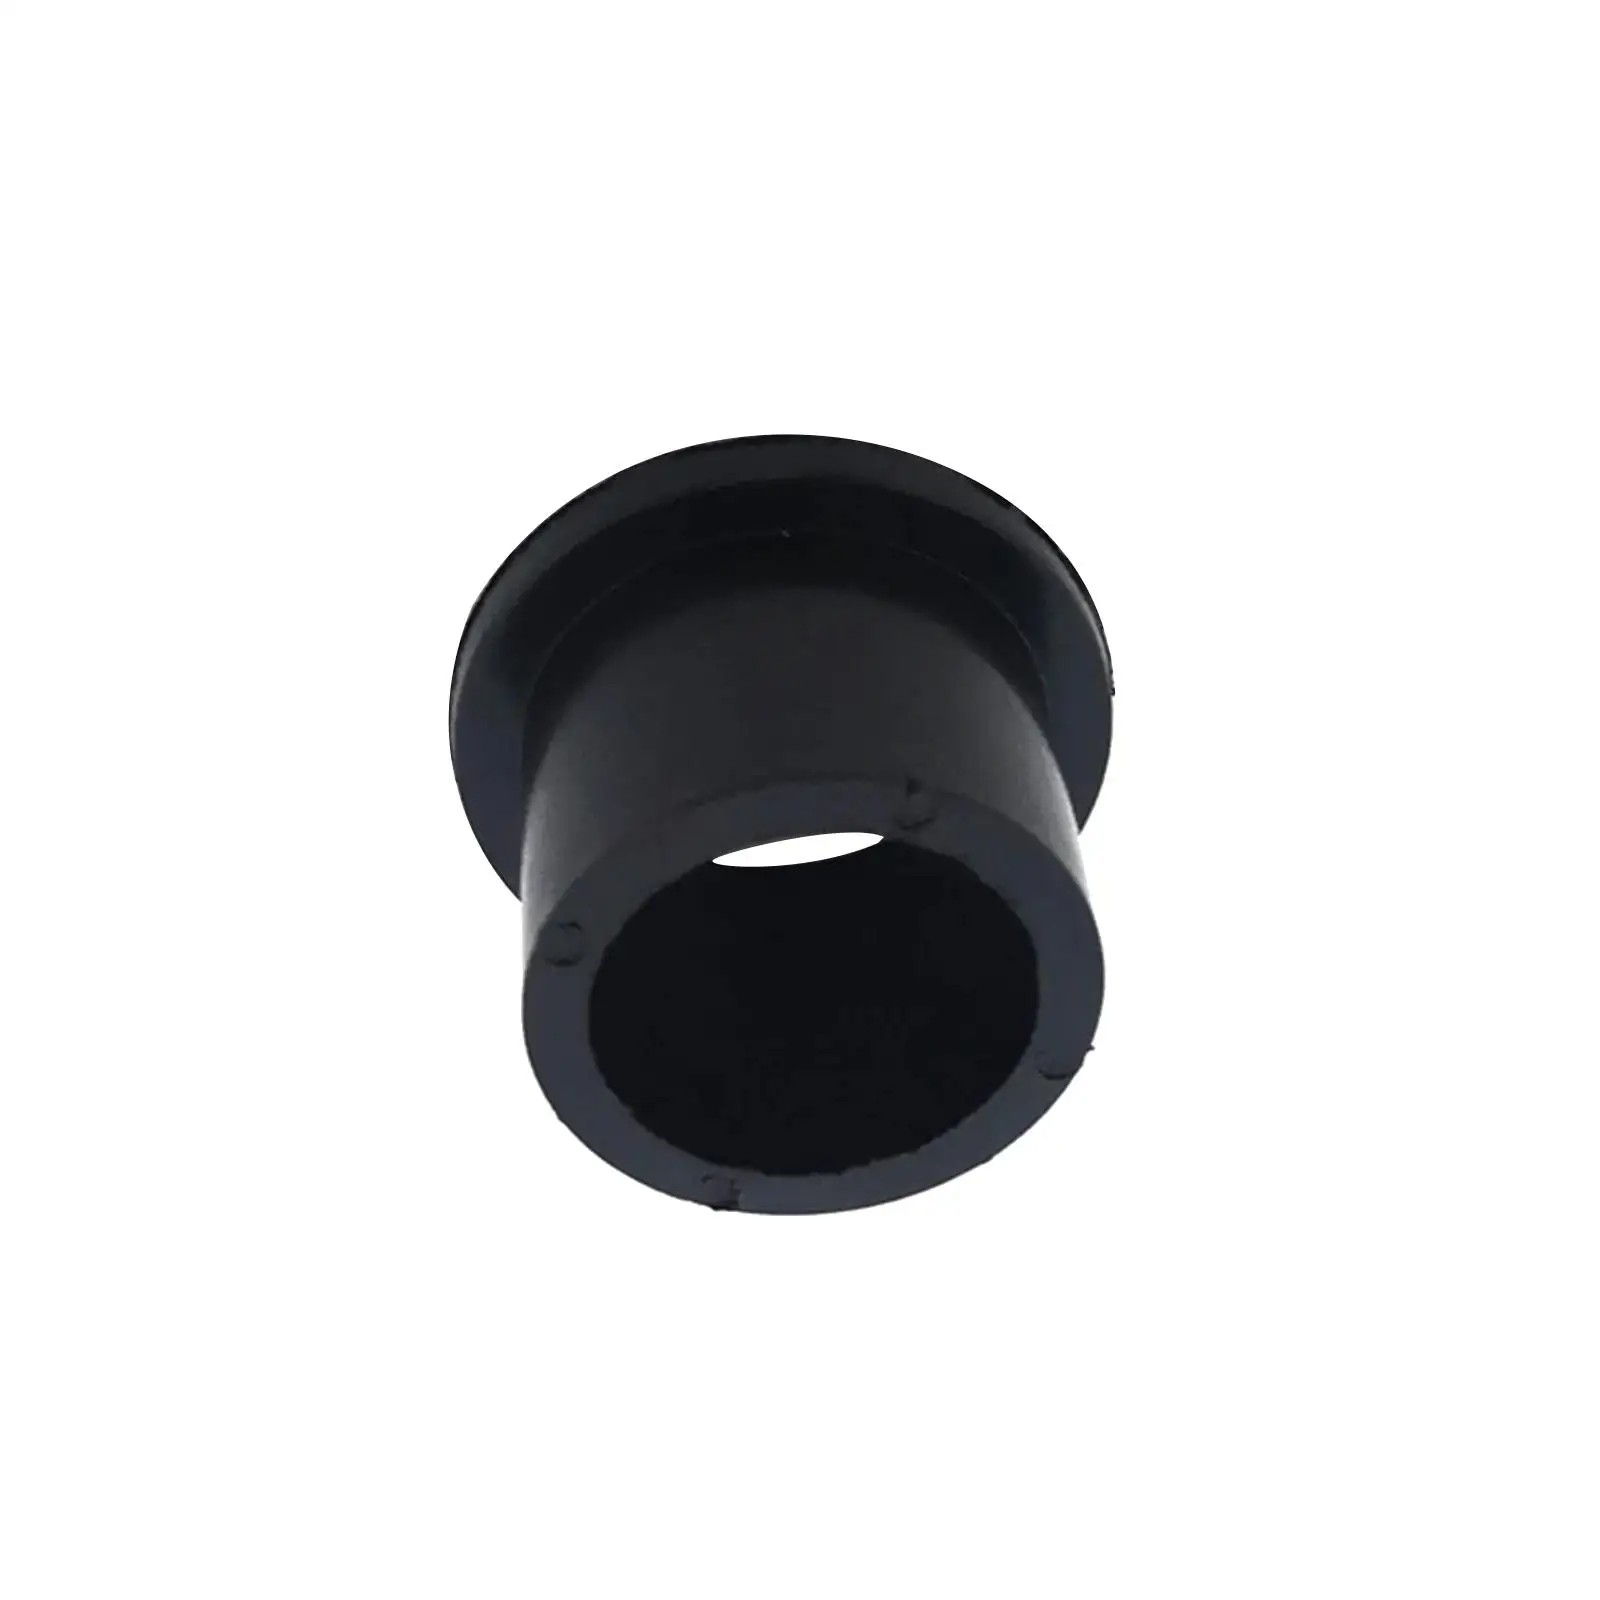 Nylon Bush Repair Parts Replacement 90386-18M44 for Yamaha Outboard Engine Easy Installation Accessories Stable Performance